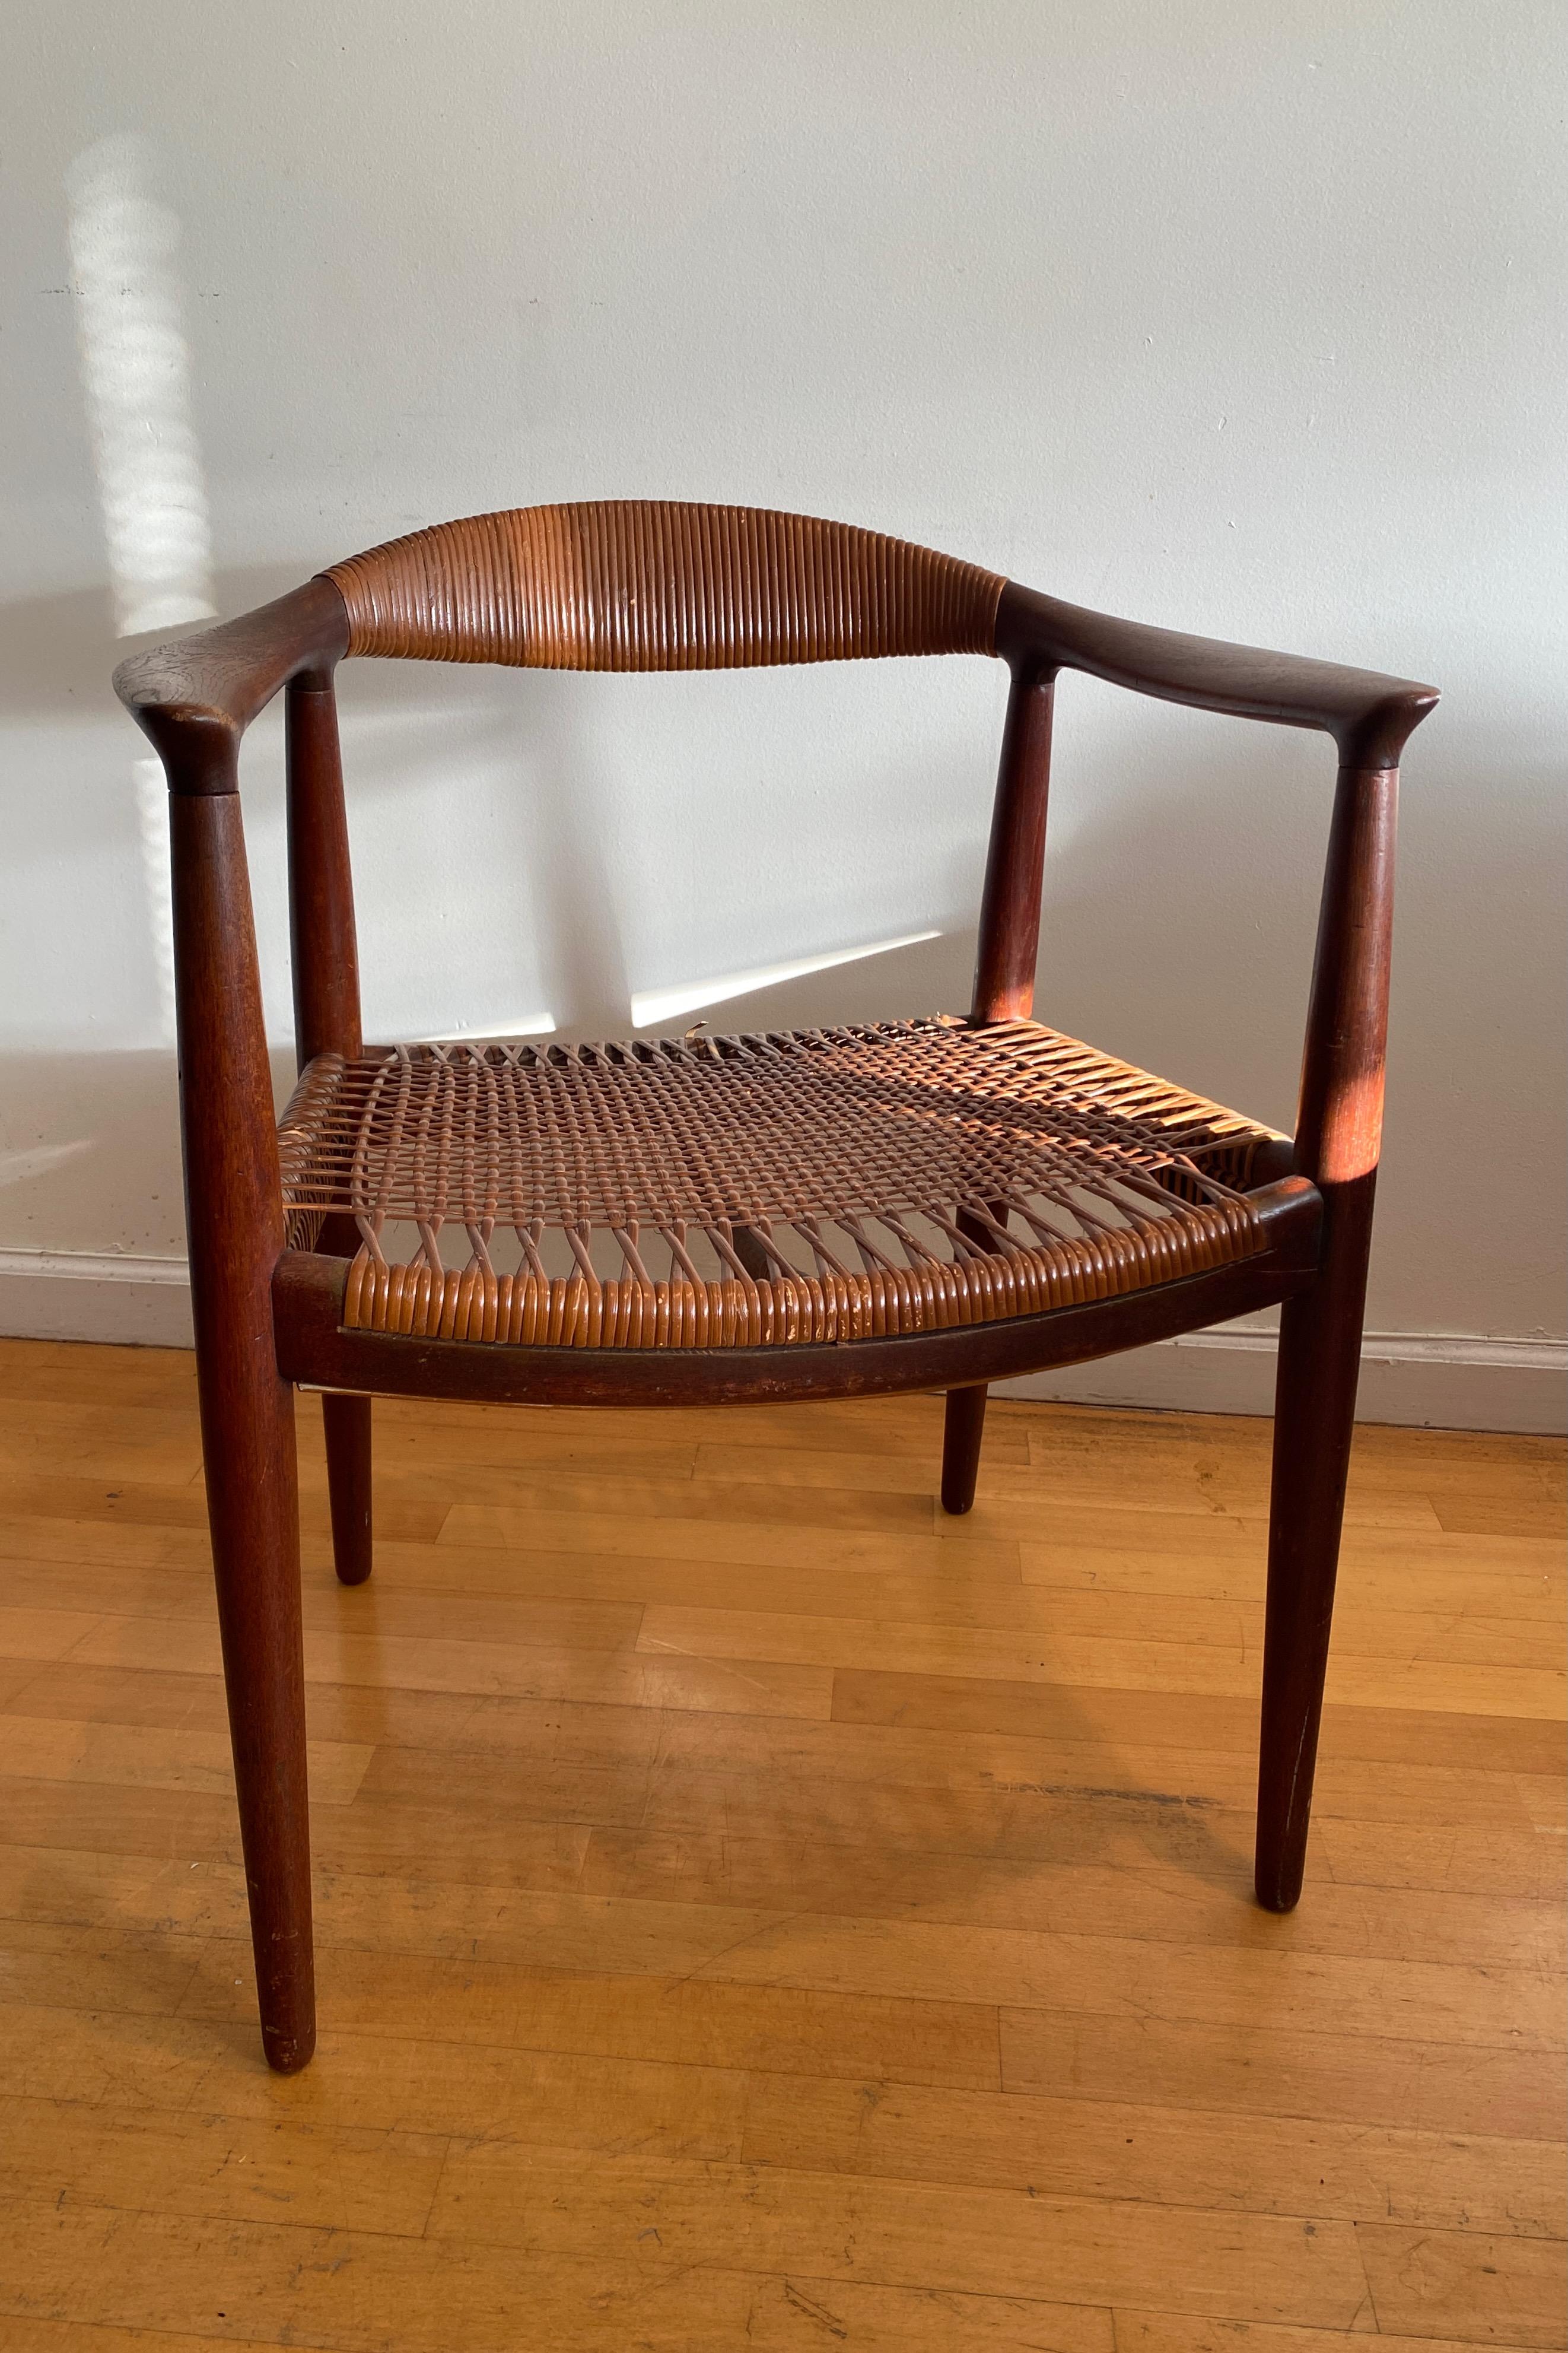 Rare pair of chair Model JH501 by Hans J Wegner, designed in 1949 and manufactured by Johannes Hansen in Denmark. 

This pair has wear and tear to the frame and rattan (please see photos). Suitable as a restoration project and priced as such.